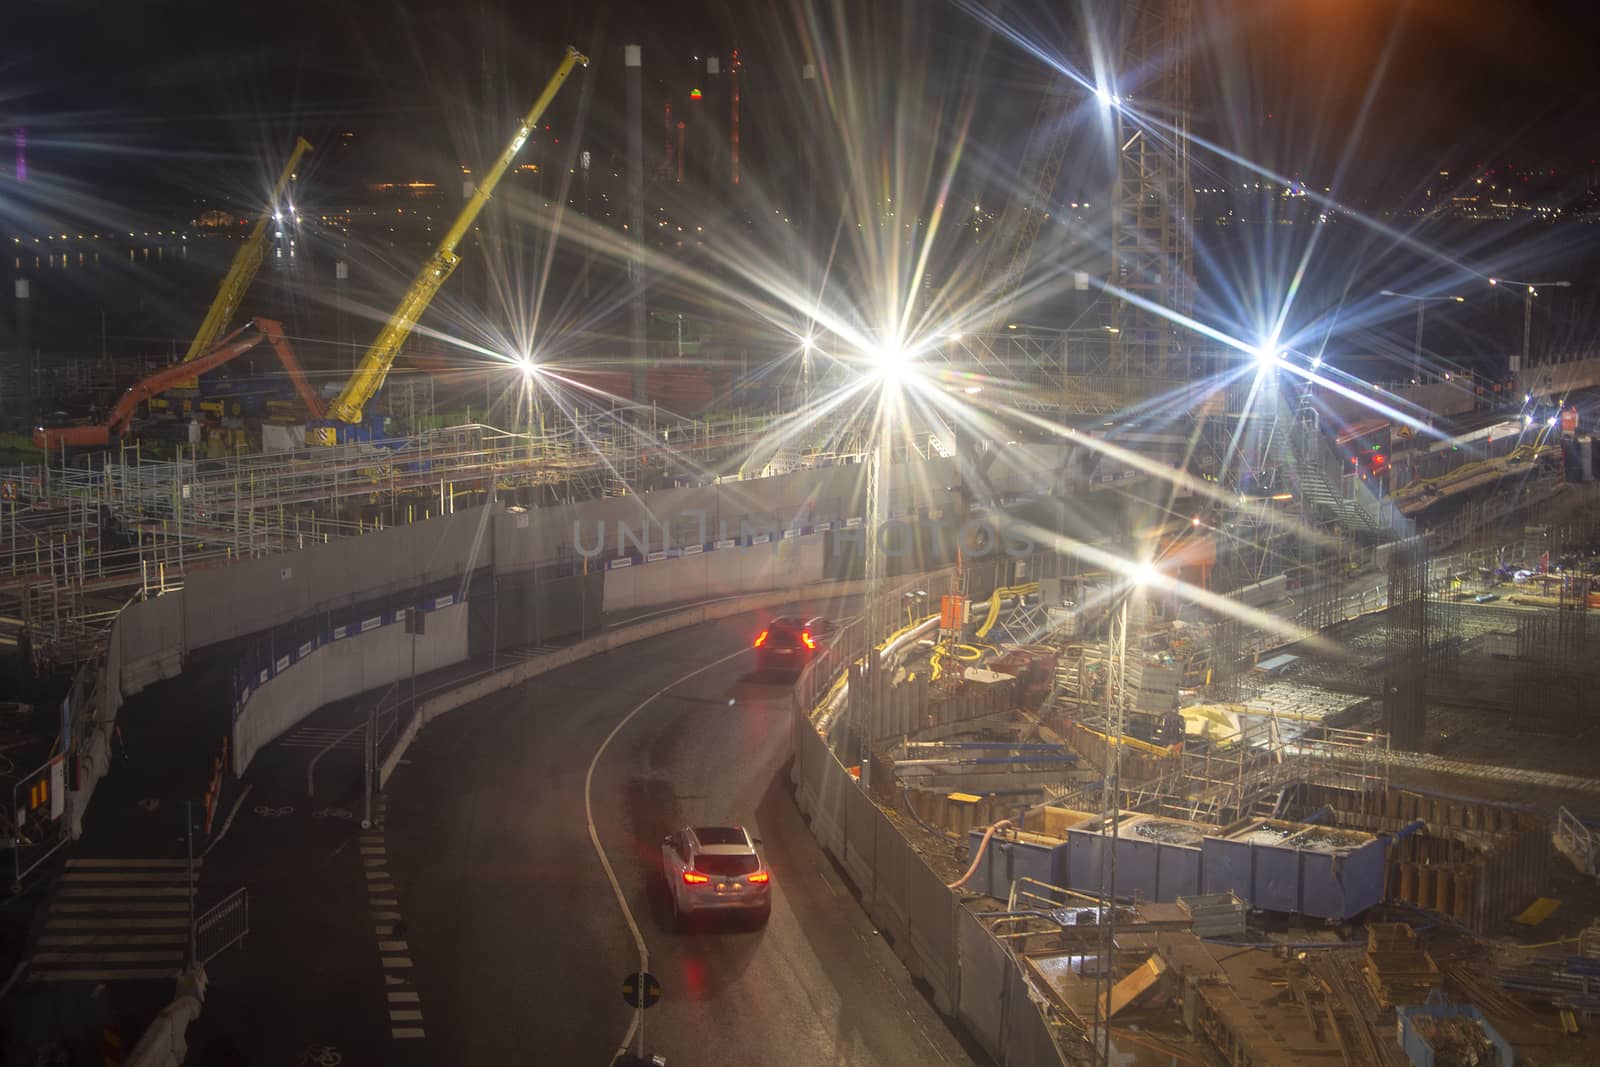 Motion blur with bright light over large construction site.